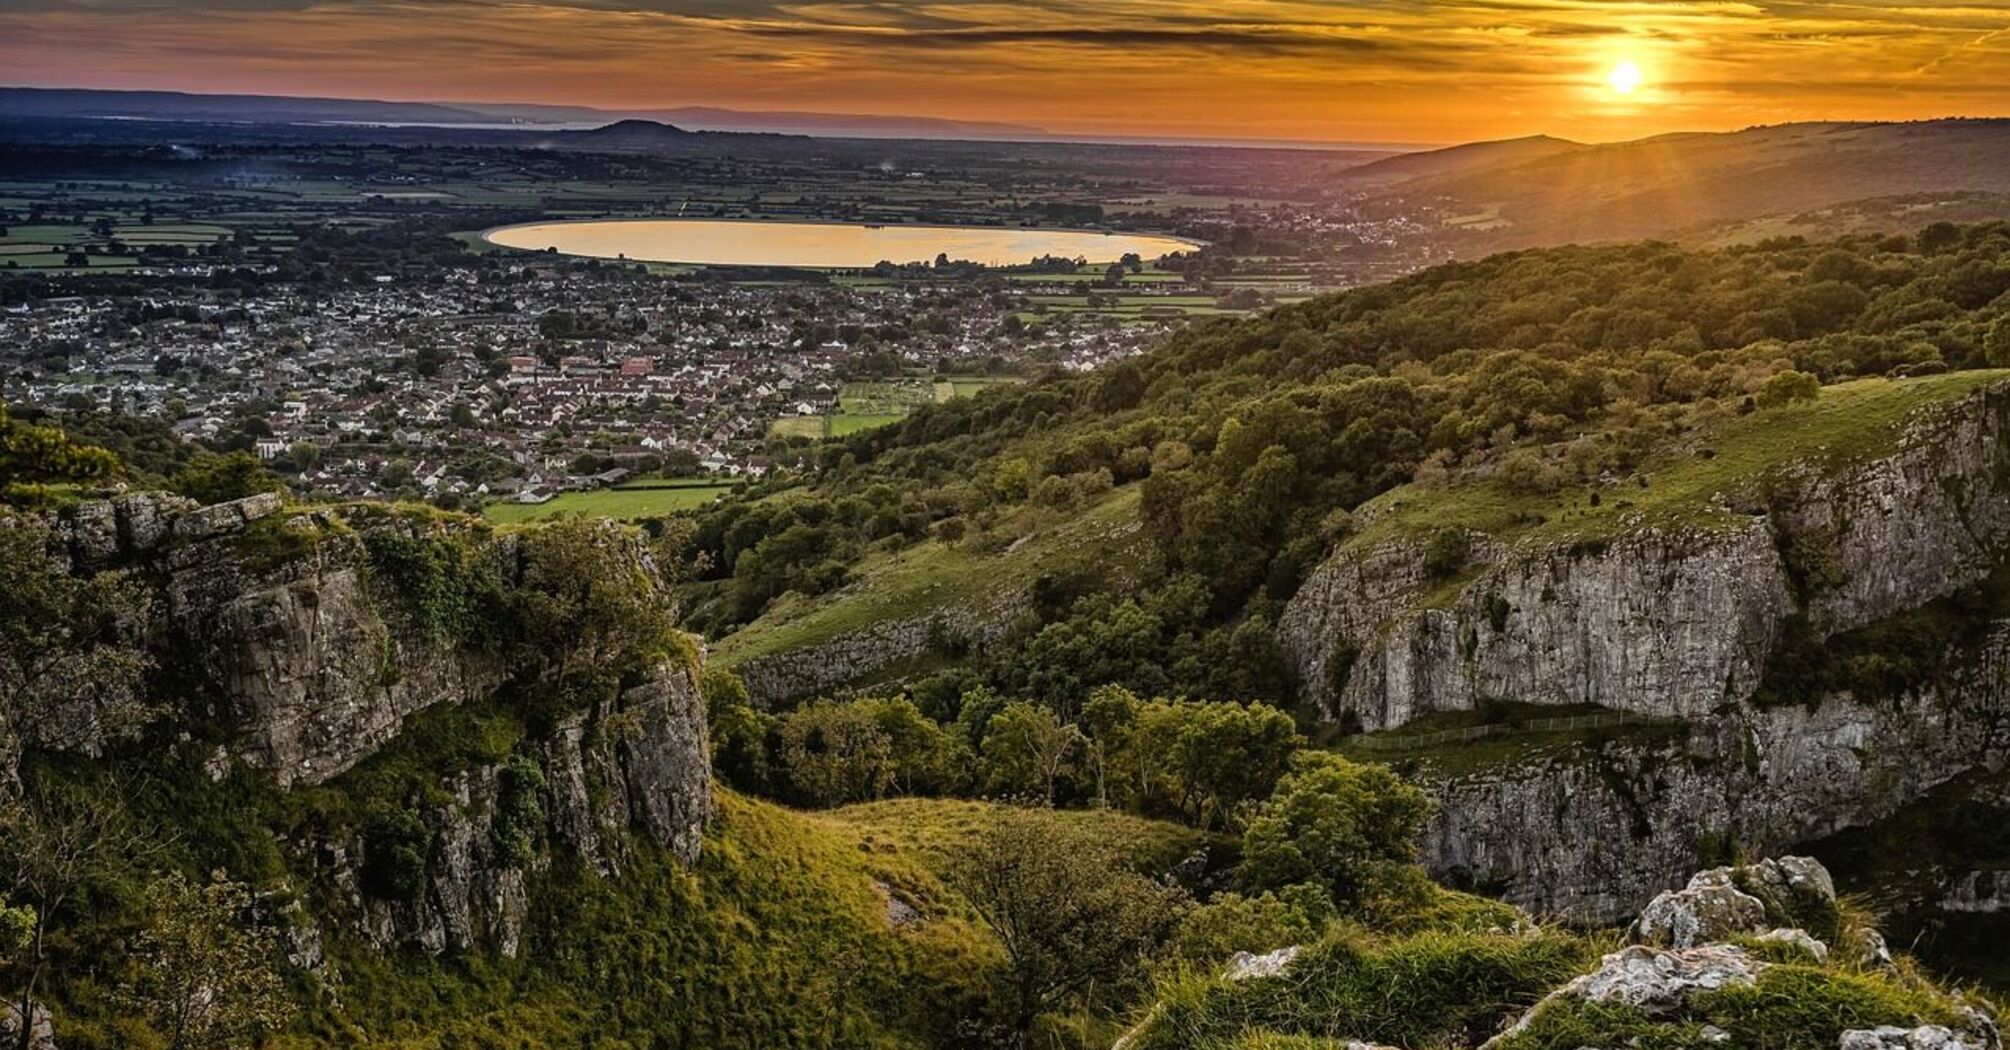 Cheddar Gorge named one of the most "unforgettable" natural attractions in the UK